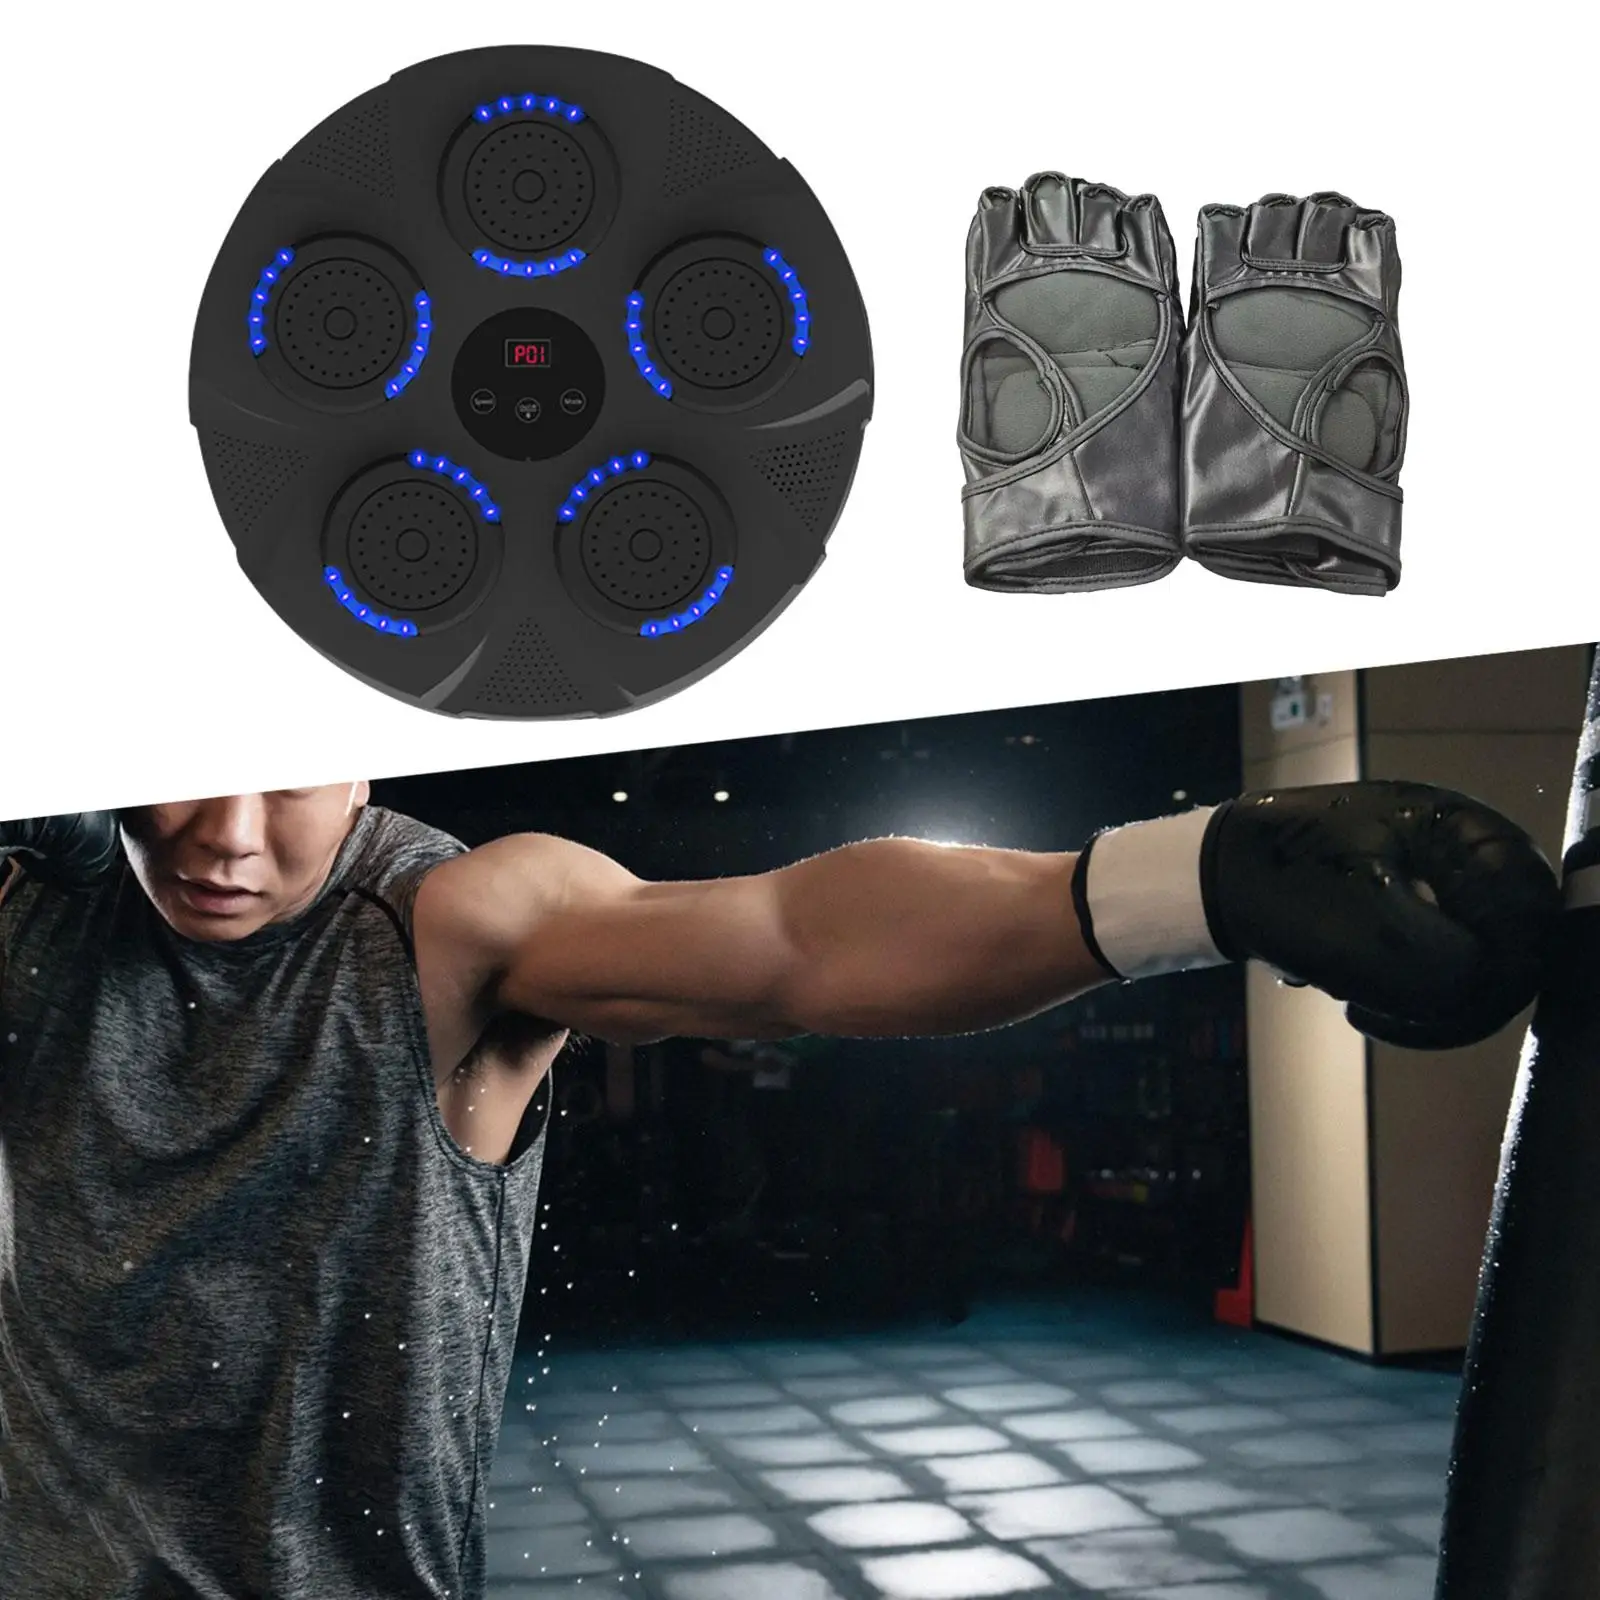 Music Boxing Training Machine Smart Hanging Reaction Target Equipment Wall Mounted for Household Sports Indoor Sanda Practice